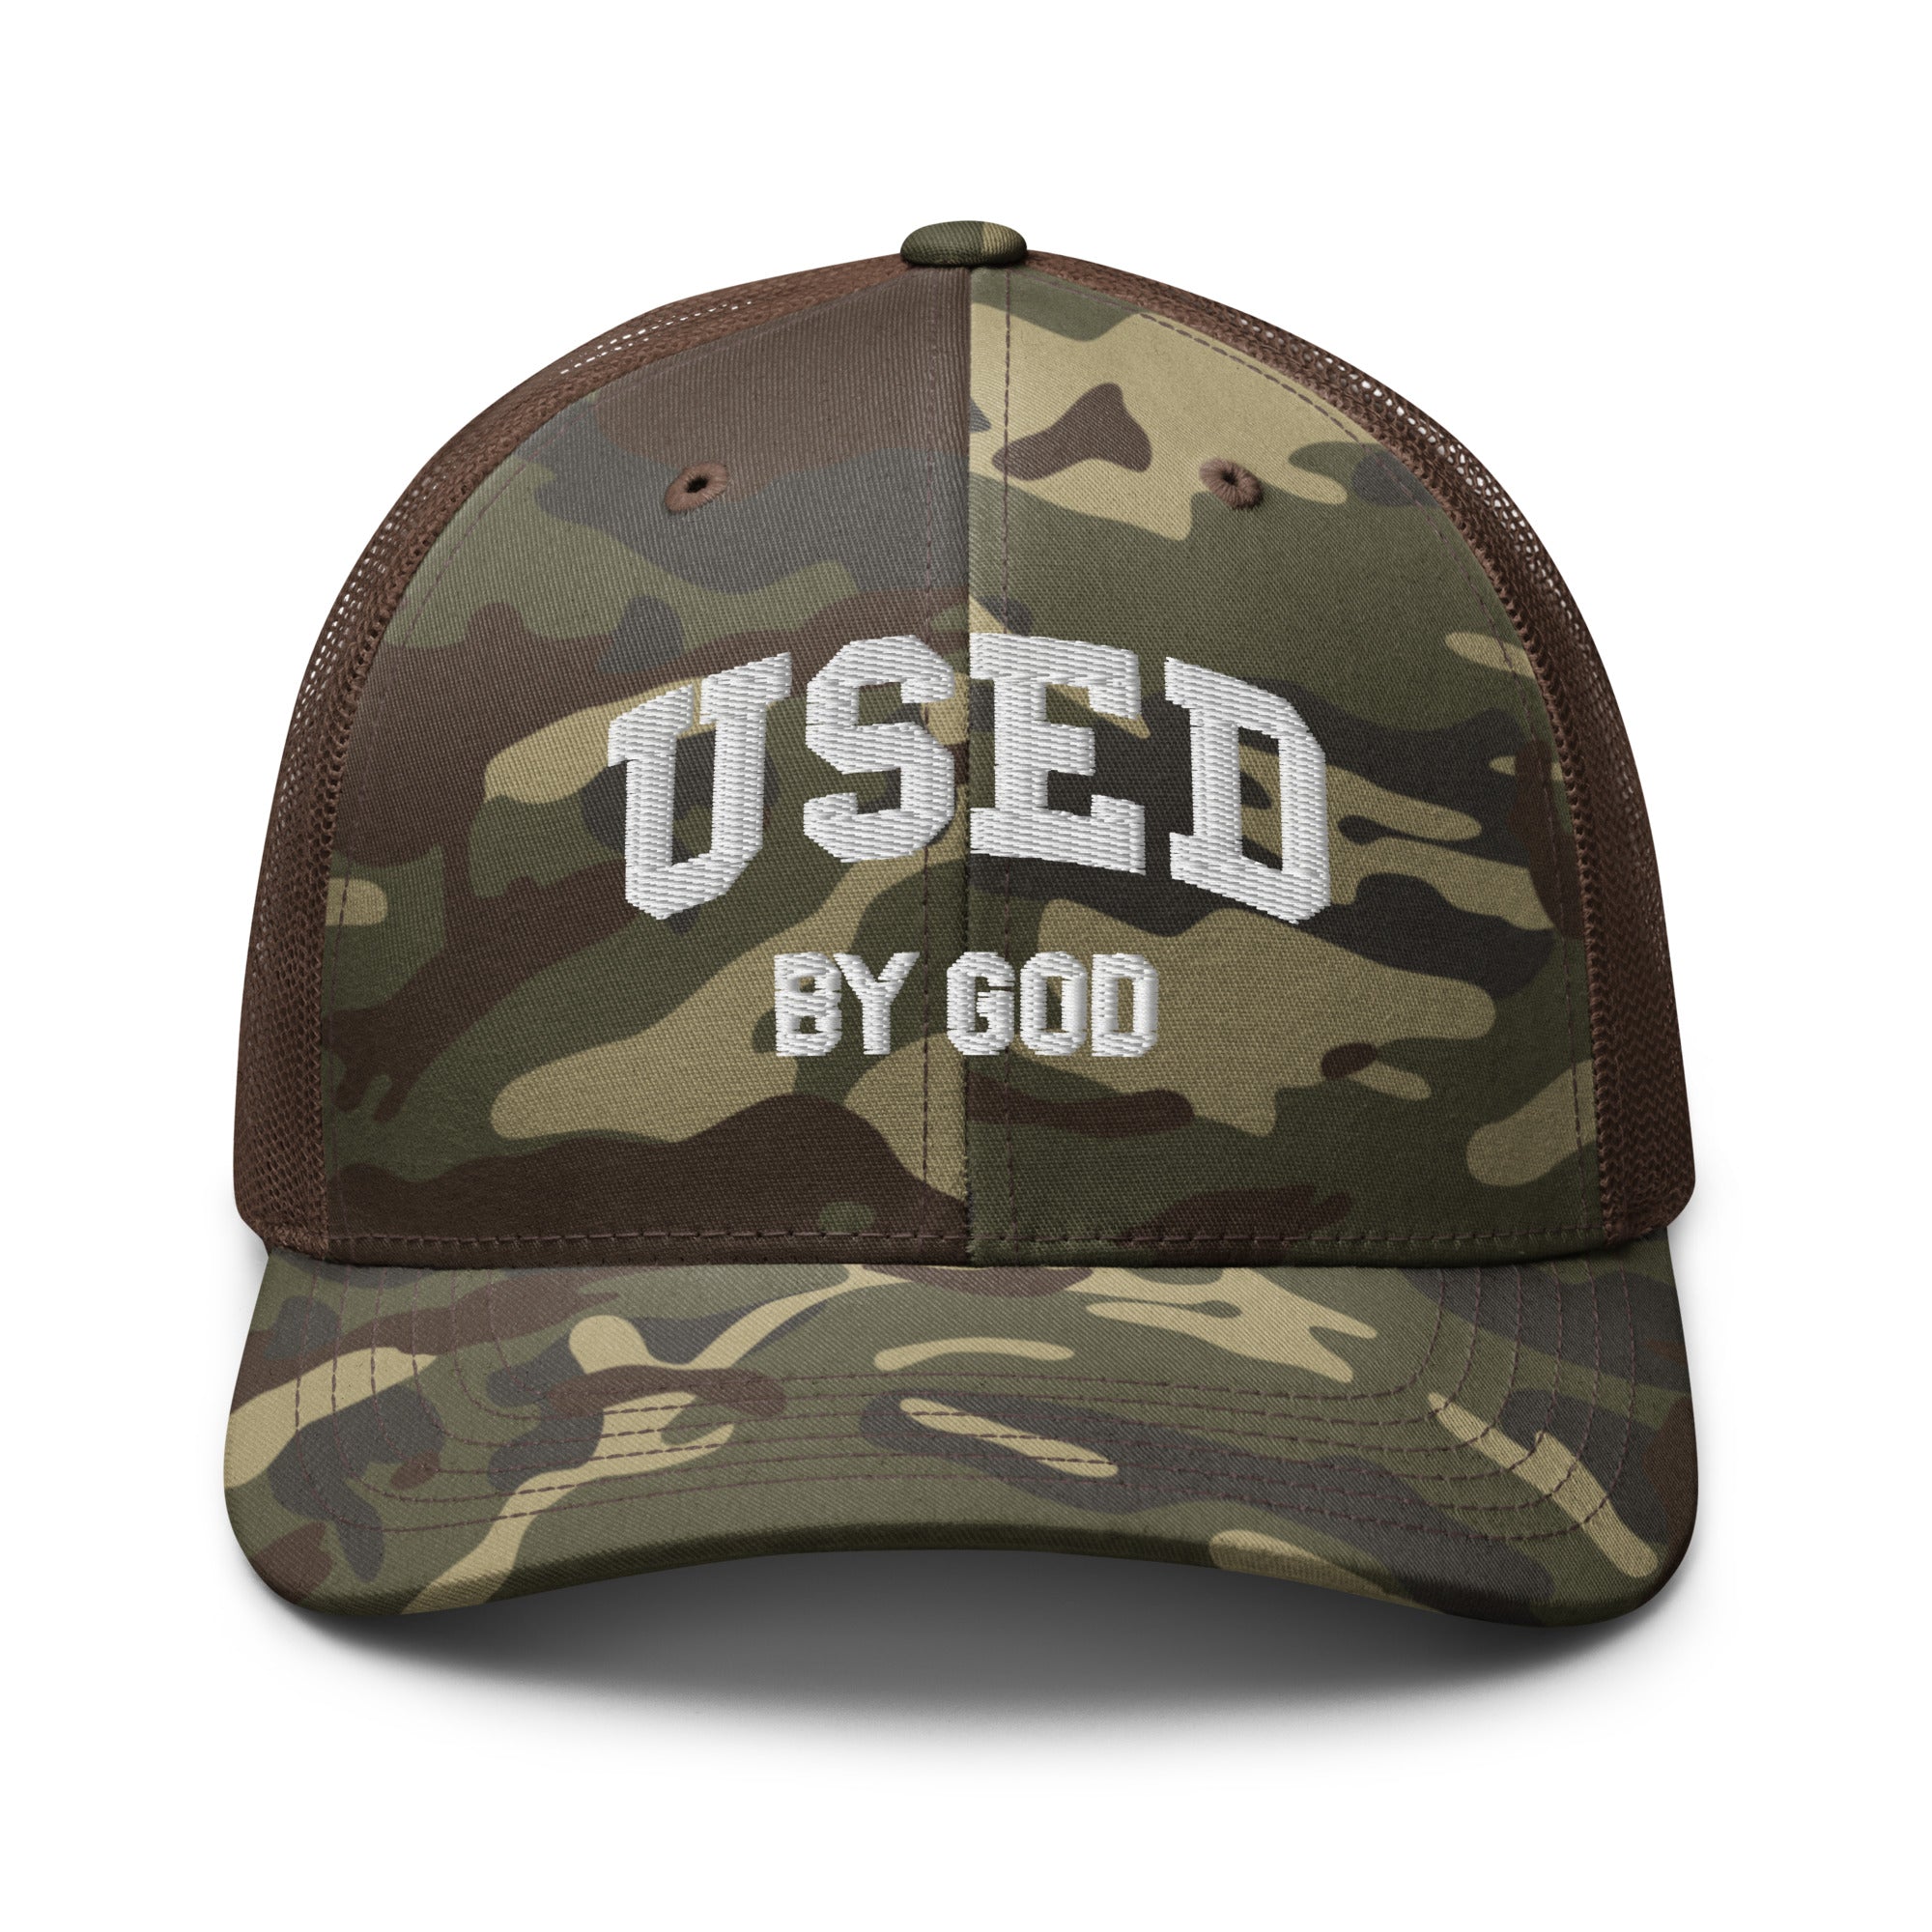 UBG Collegiate Camo Trucker Hat, Used By God, Used By God Clothing, Christian Apparel, Christian Hats, Christian T-Shirts, Christian Clothing, God Shirts, Christian Sweatshirts, God Clothing, Jesus Hoodie, Jesus Clothes, God Is Dope, Art Of Homage, Red Letter Clothing, Elevated Faith, Active Faith Sports, Beacon Threads, God The Father Apparel